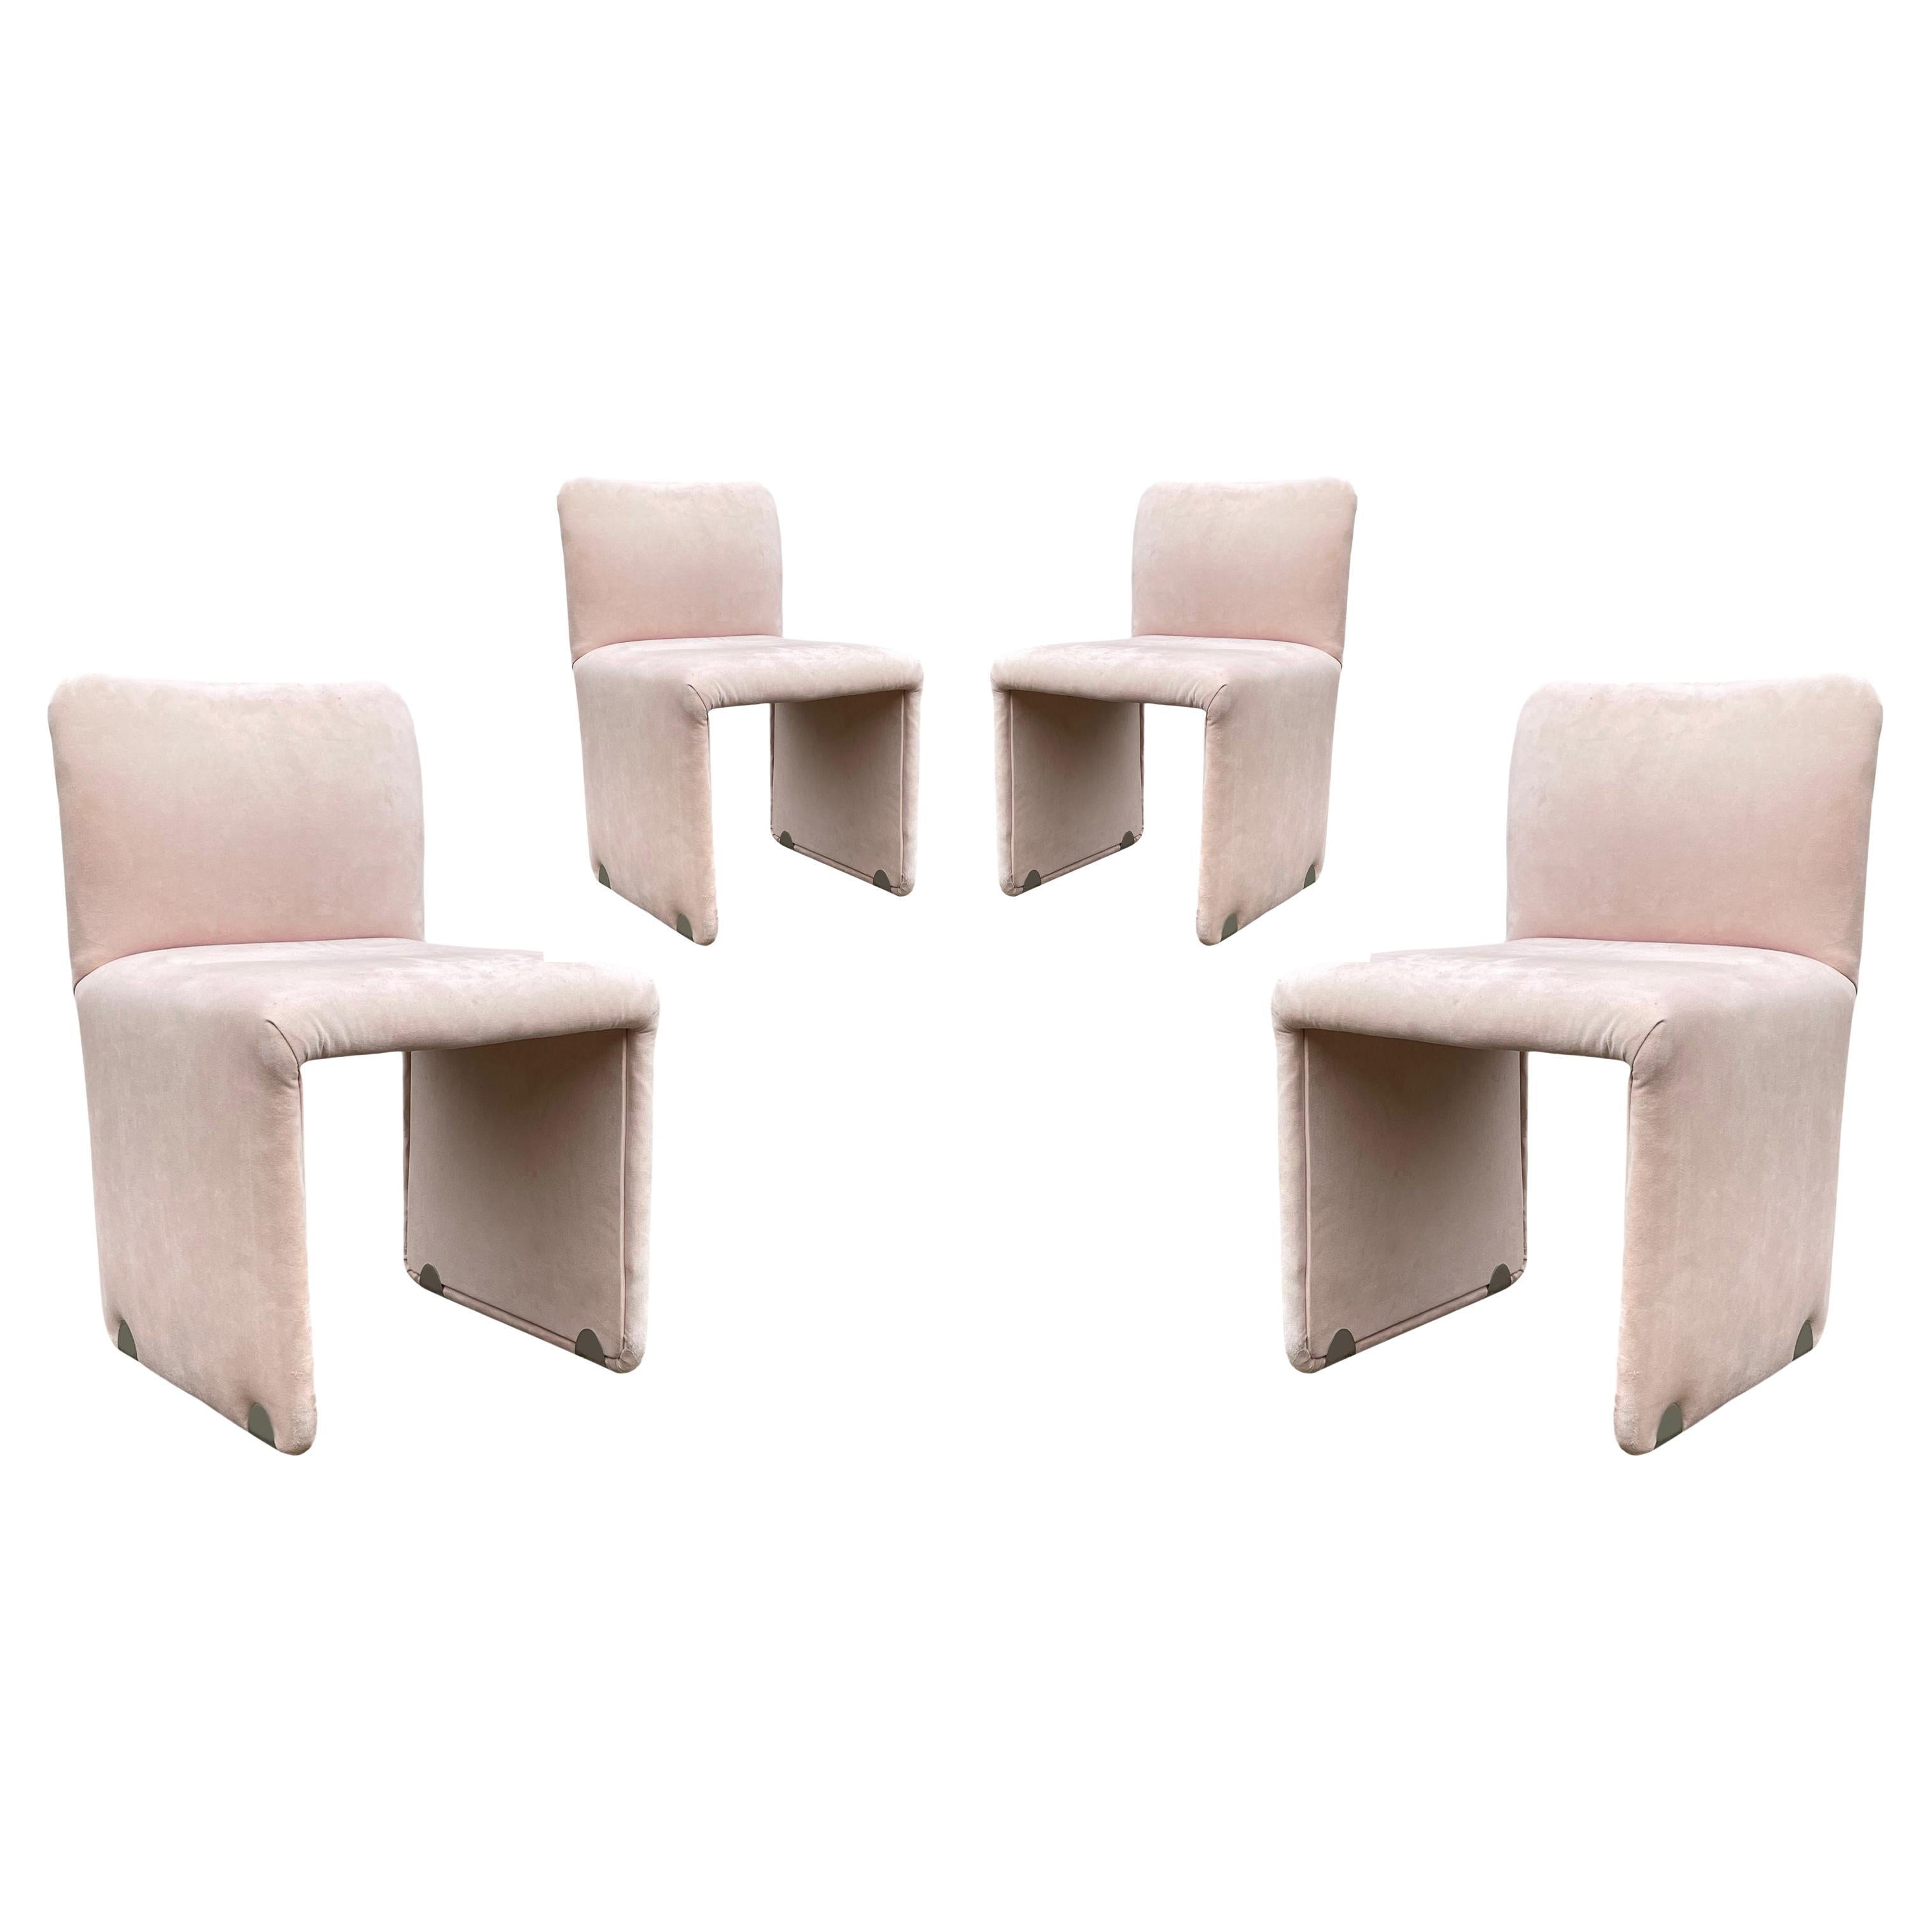 Set of 4 Mid Century Italian Modern Dining Chairs in Blush Pink Suede